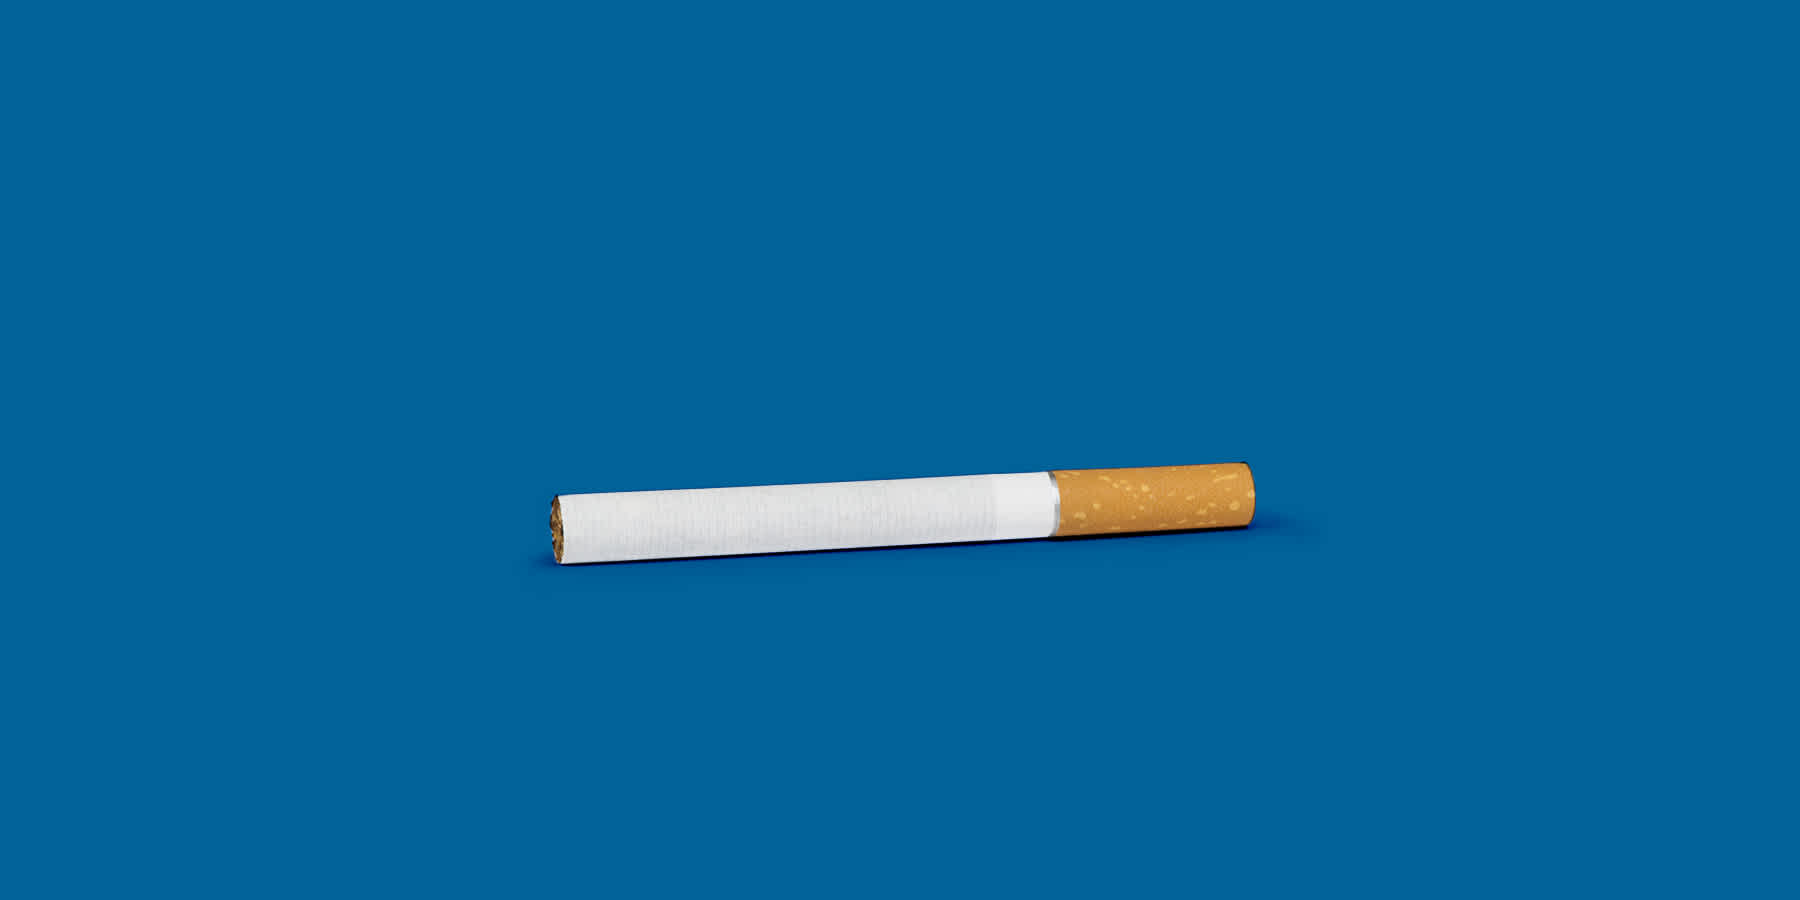 Cigarette against a blue background to represent smoking affecting fertility